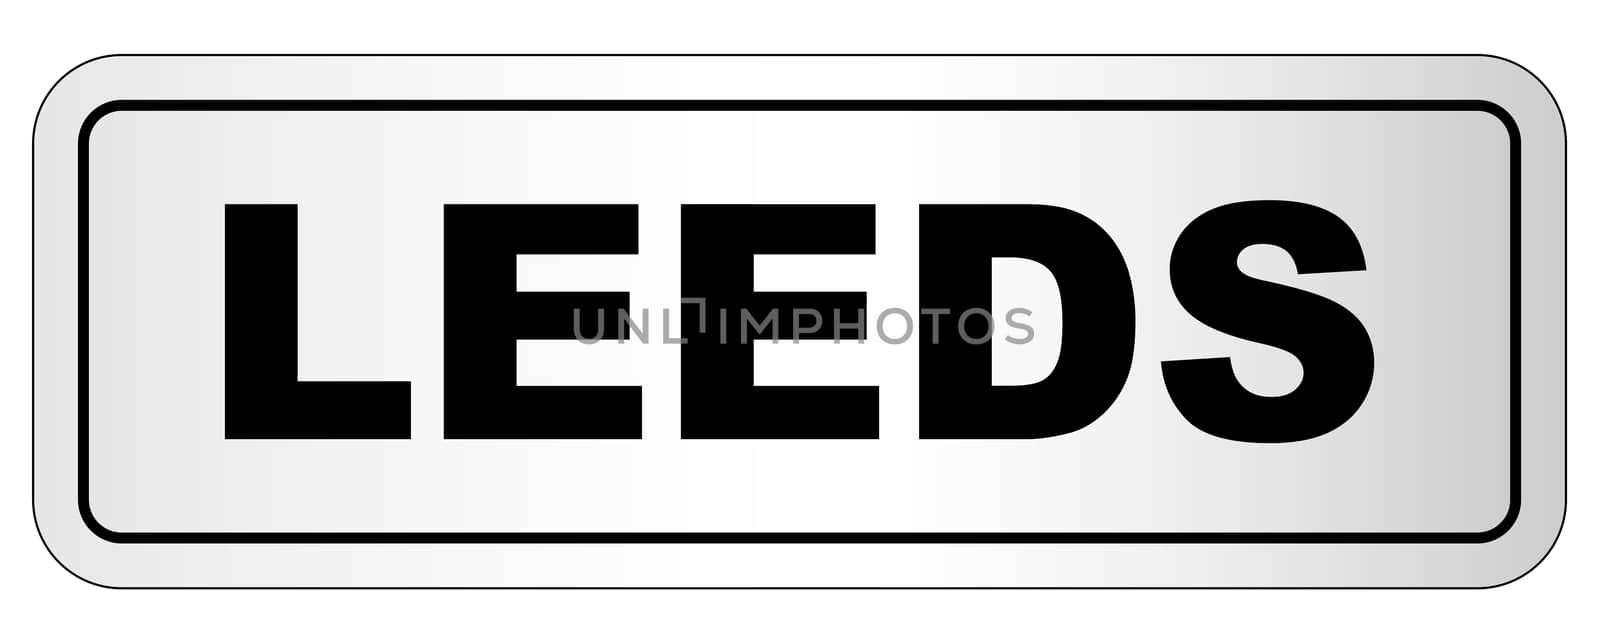 The city of Leeds nameplate on a white background